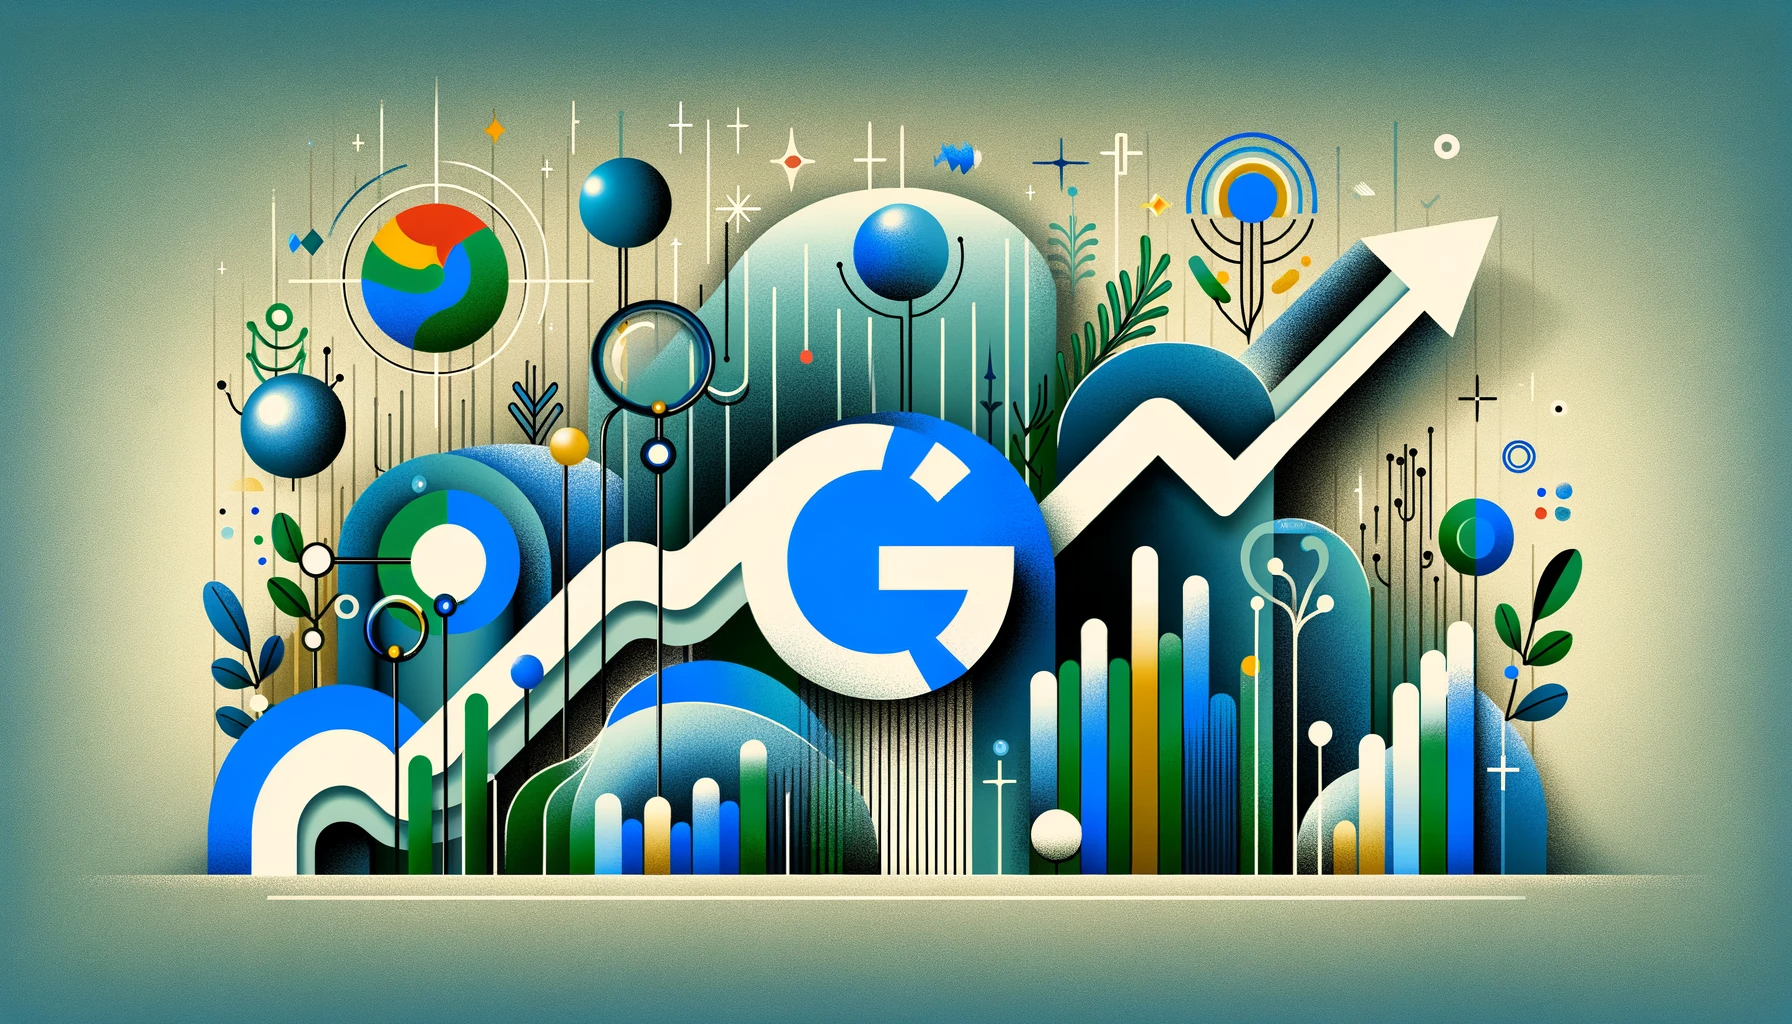 A sleek, wide-format blog cover image representing Google's 2023 job market trends. It features the Google logo, abstract elements, and graphical representations of fluctuating trends in shades of blue and green, highlighting the dynamic job market.